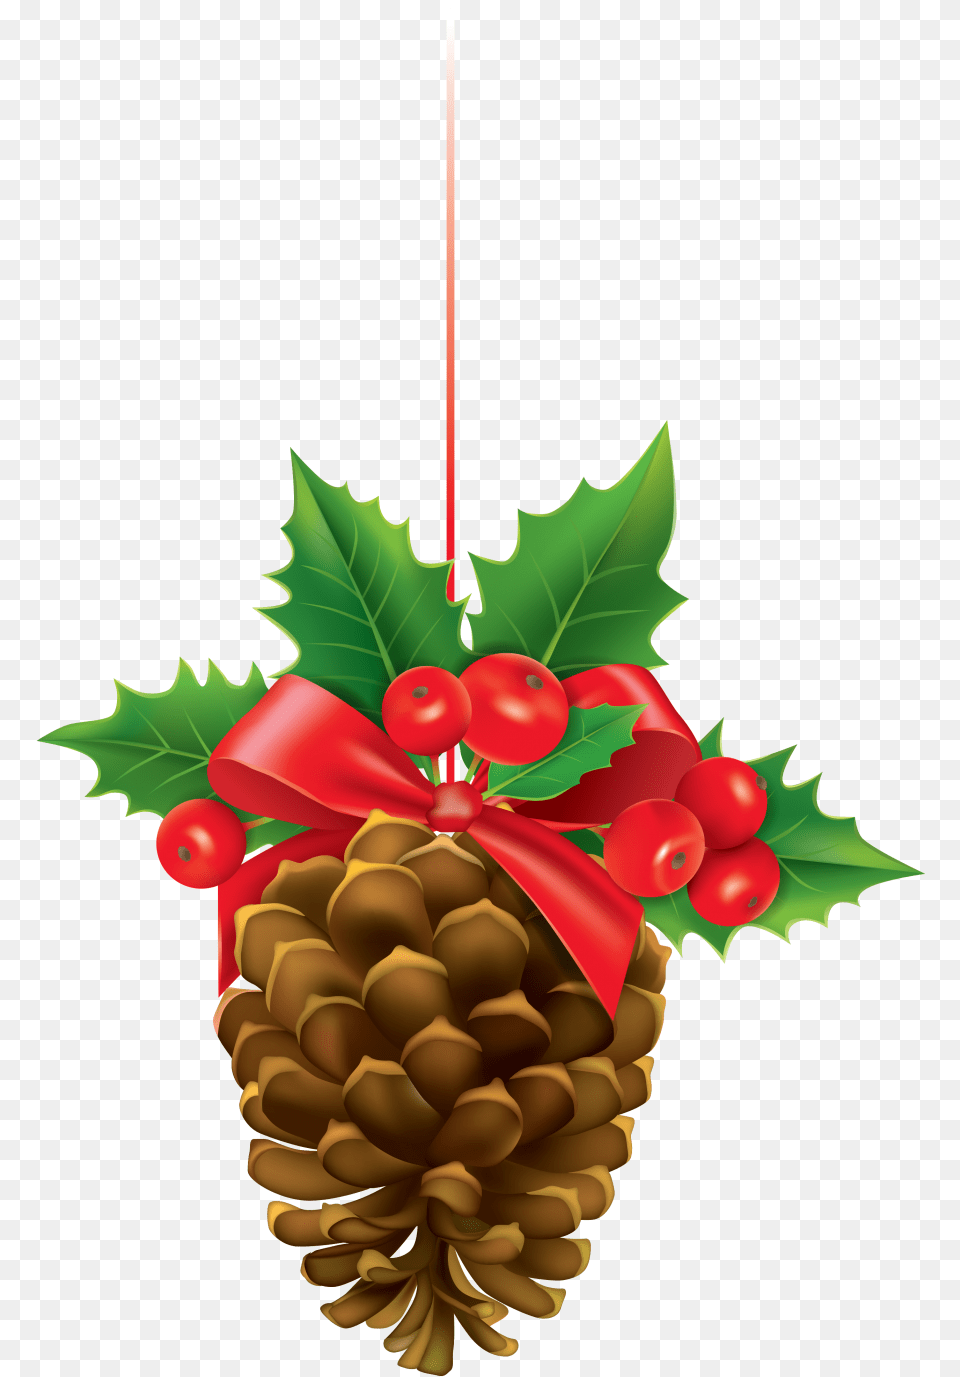 Pine Cone Cartoon Pencil Christmas Pine Cone Clipart, Leaf, Plant, Tree, Food Png